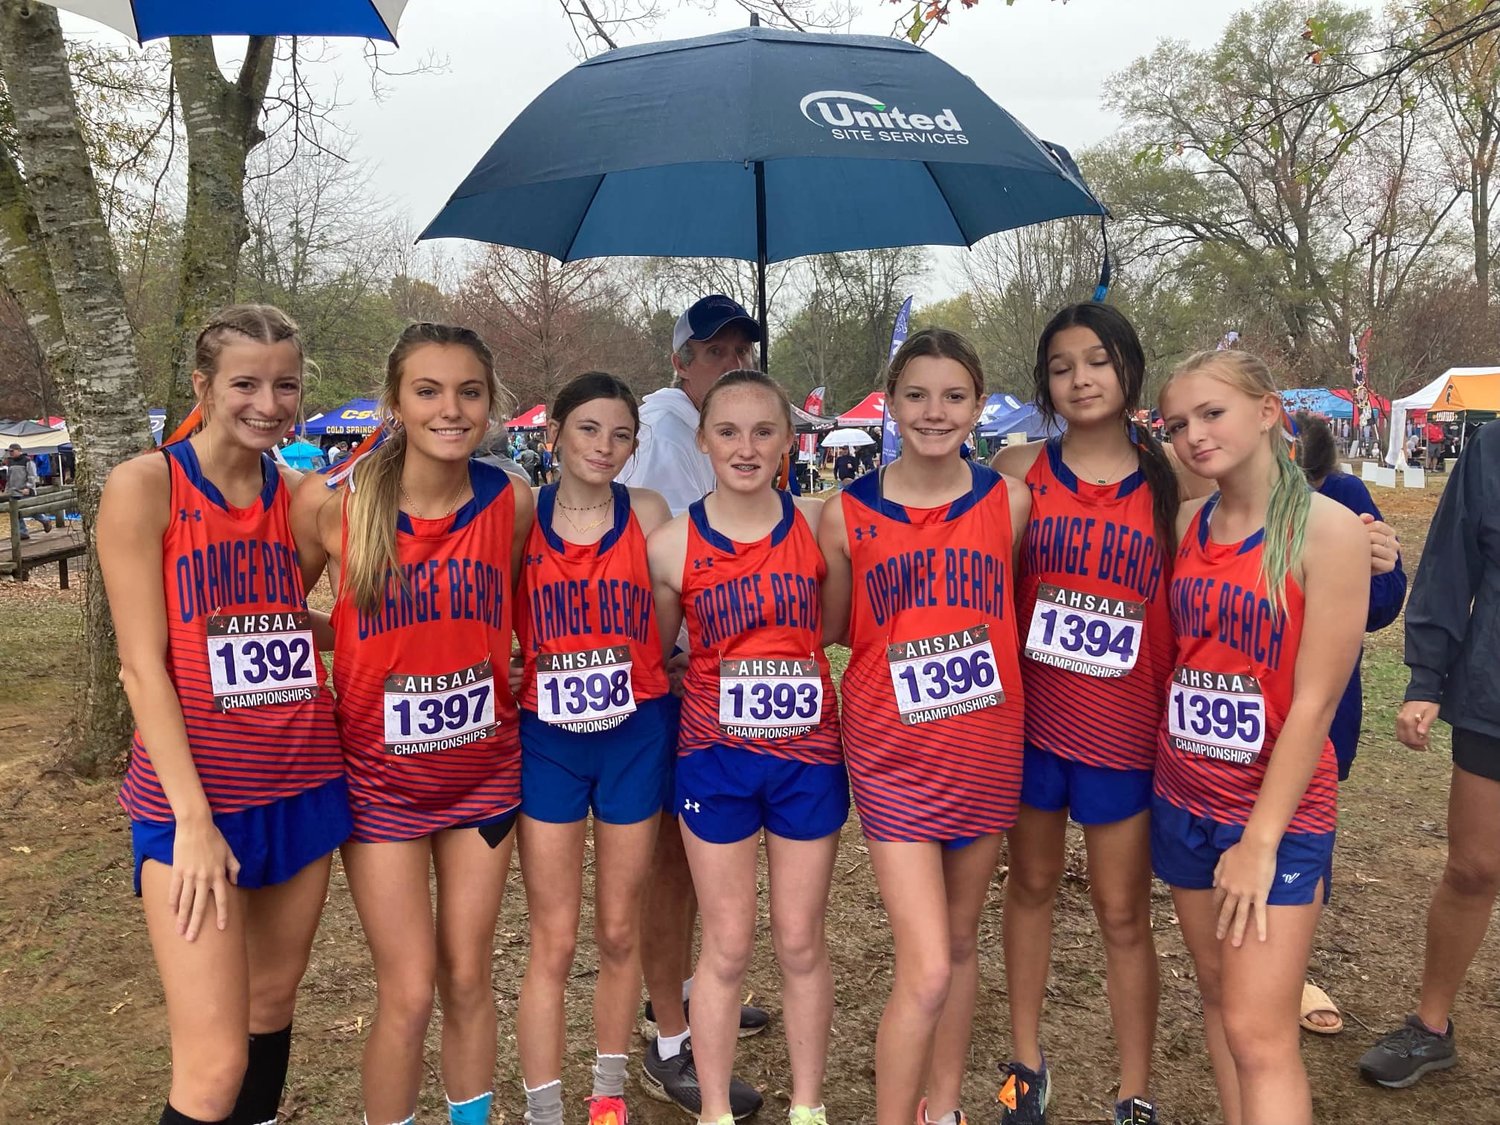 The Orange Beach Makos were among 17 teams from Baldwin County that competed at Oakville Indian Mounds Park for the AHSAA cross country state championships Saturday, Nov. 5. Orange Beach’s state representatives included Brooke Barnett, Libby Tierce, Claire Atkins, Addison Davis, Perry Webb, Teigan Buhta and Brylee Thompson.